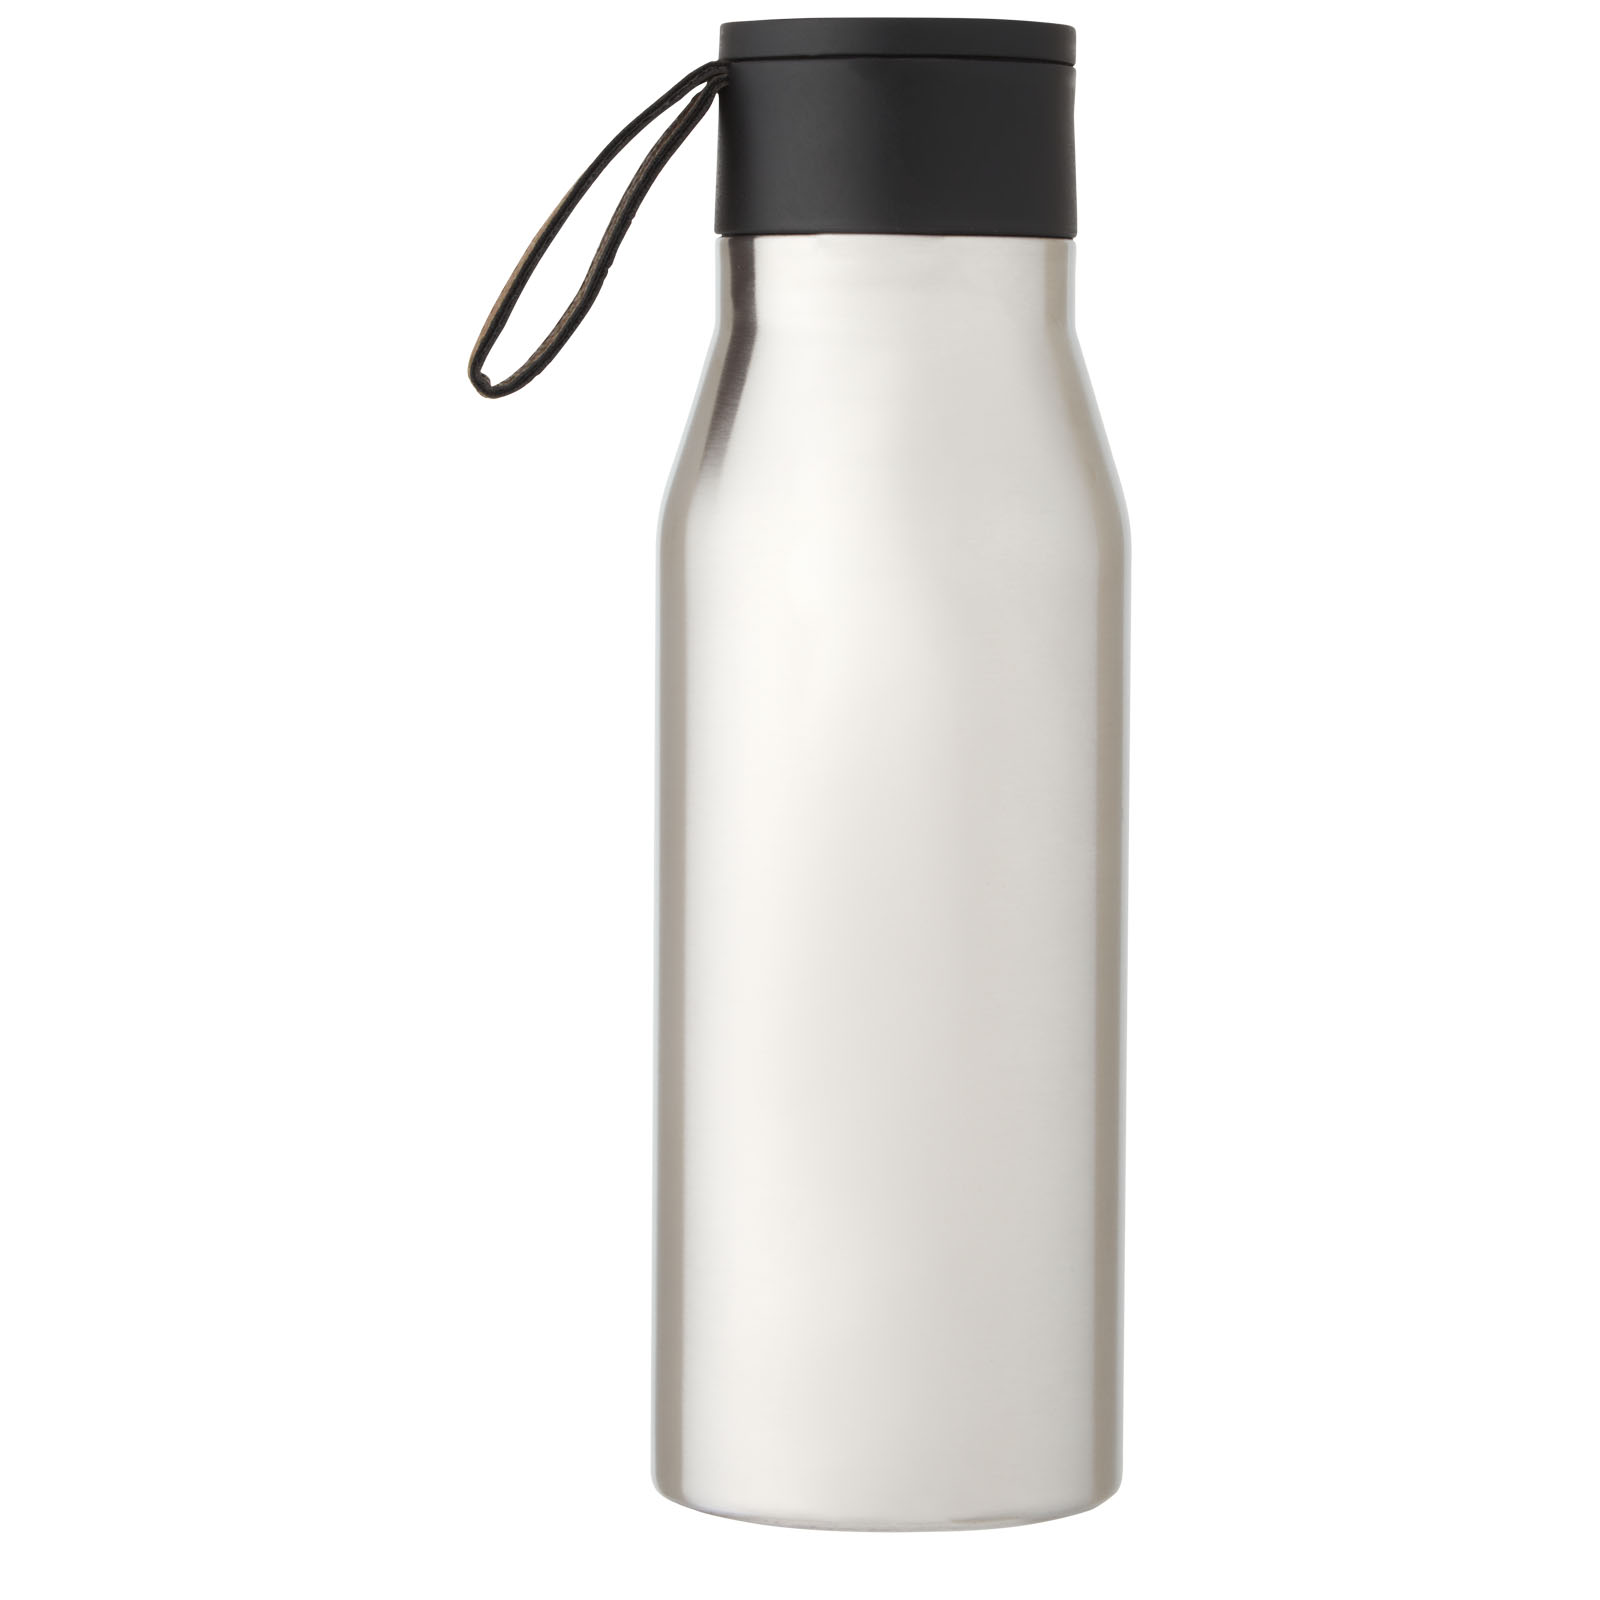 Advertising Insulated bottles - Ljungan 500 ml copper vacuum insulated stainless steel bottle with PU leather strap and lid - 3